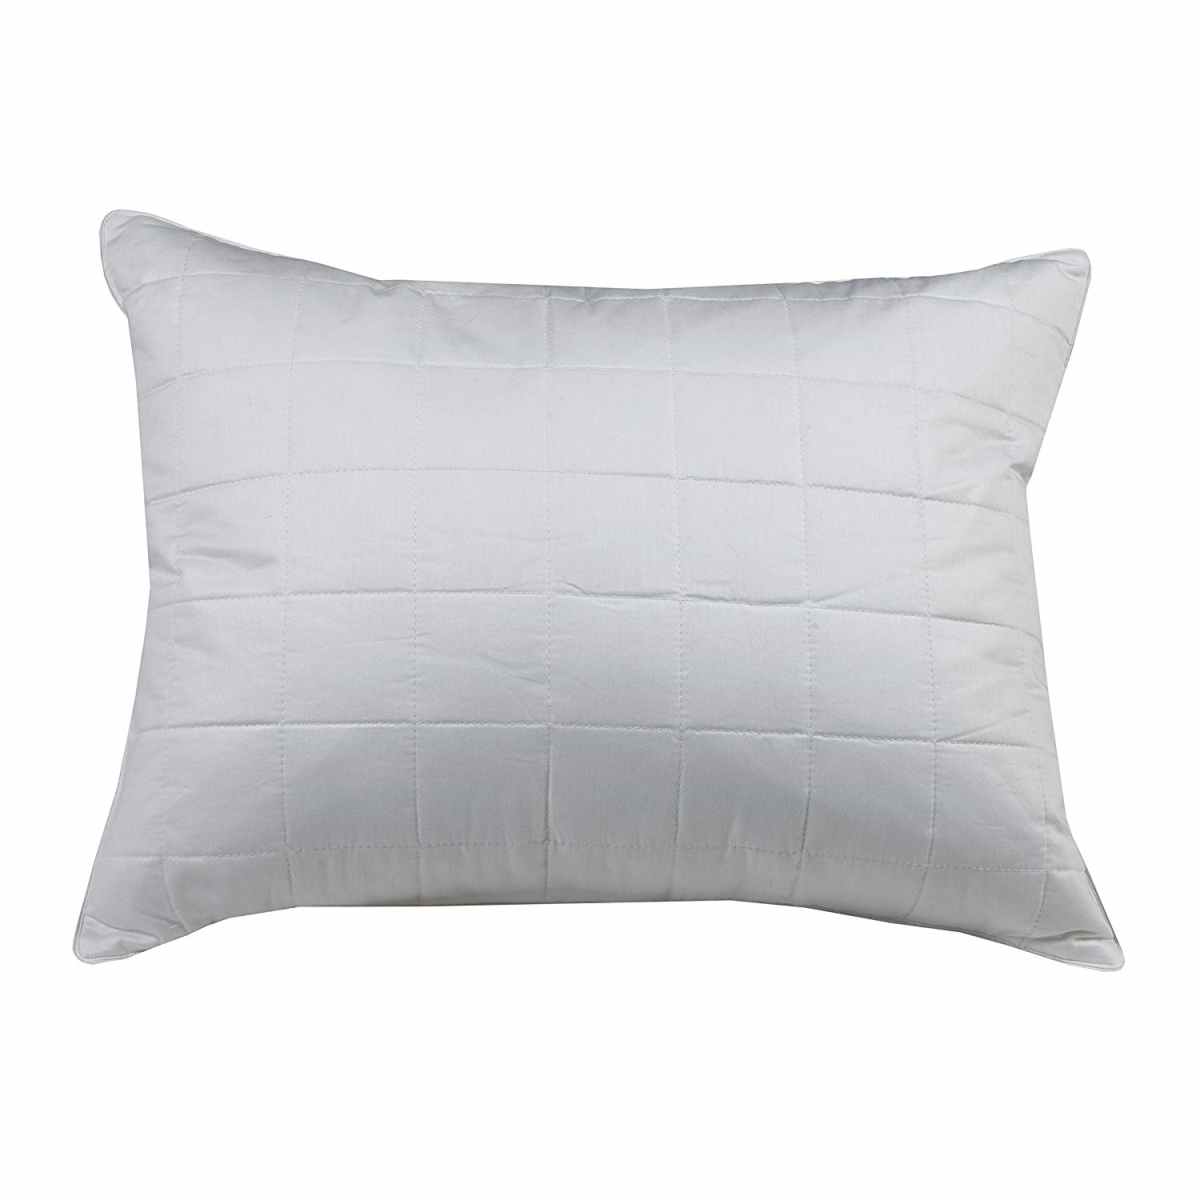 411092 Quilted Feather Pillow, White - Standard Size